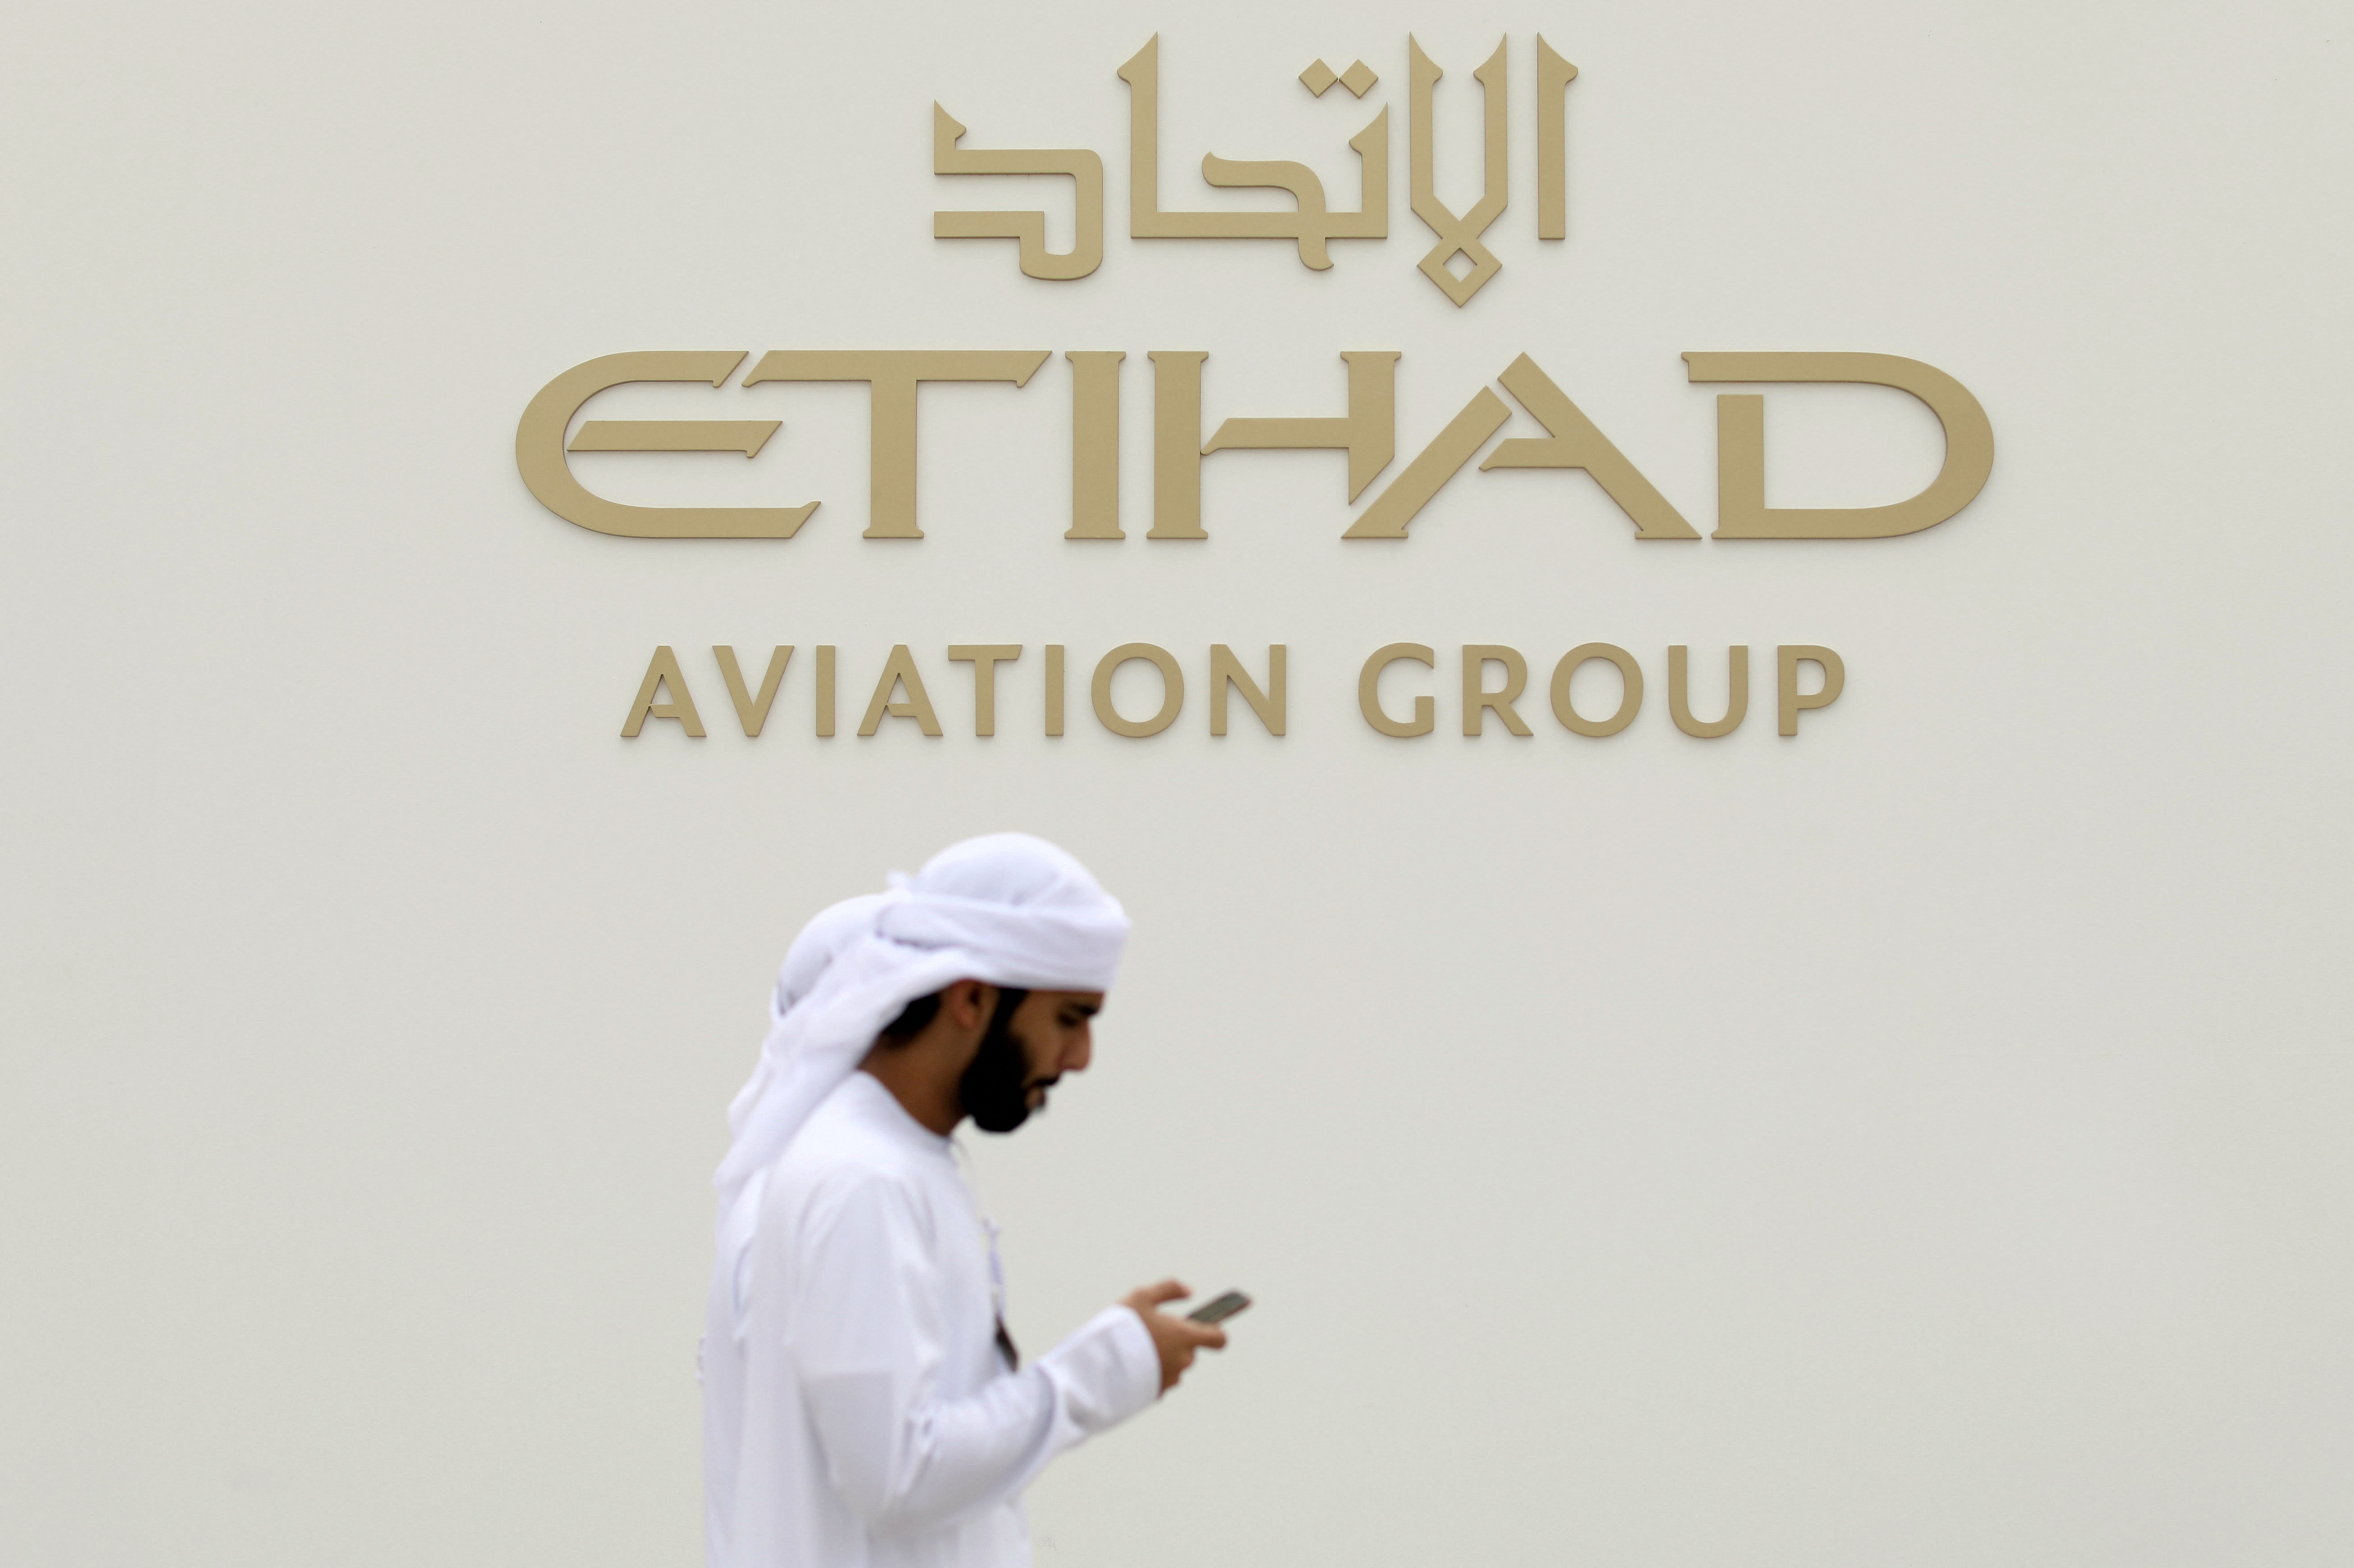 A visitor walks past the Etihad Aviation Group logo on display during the fifth day of Dubai Air Show in Dubai